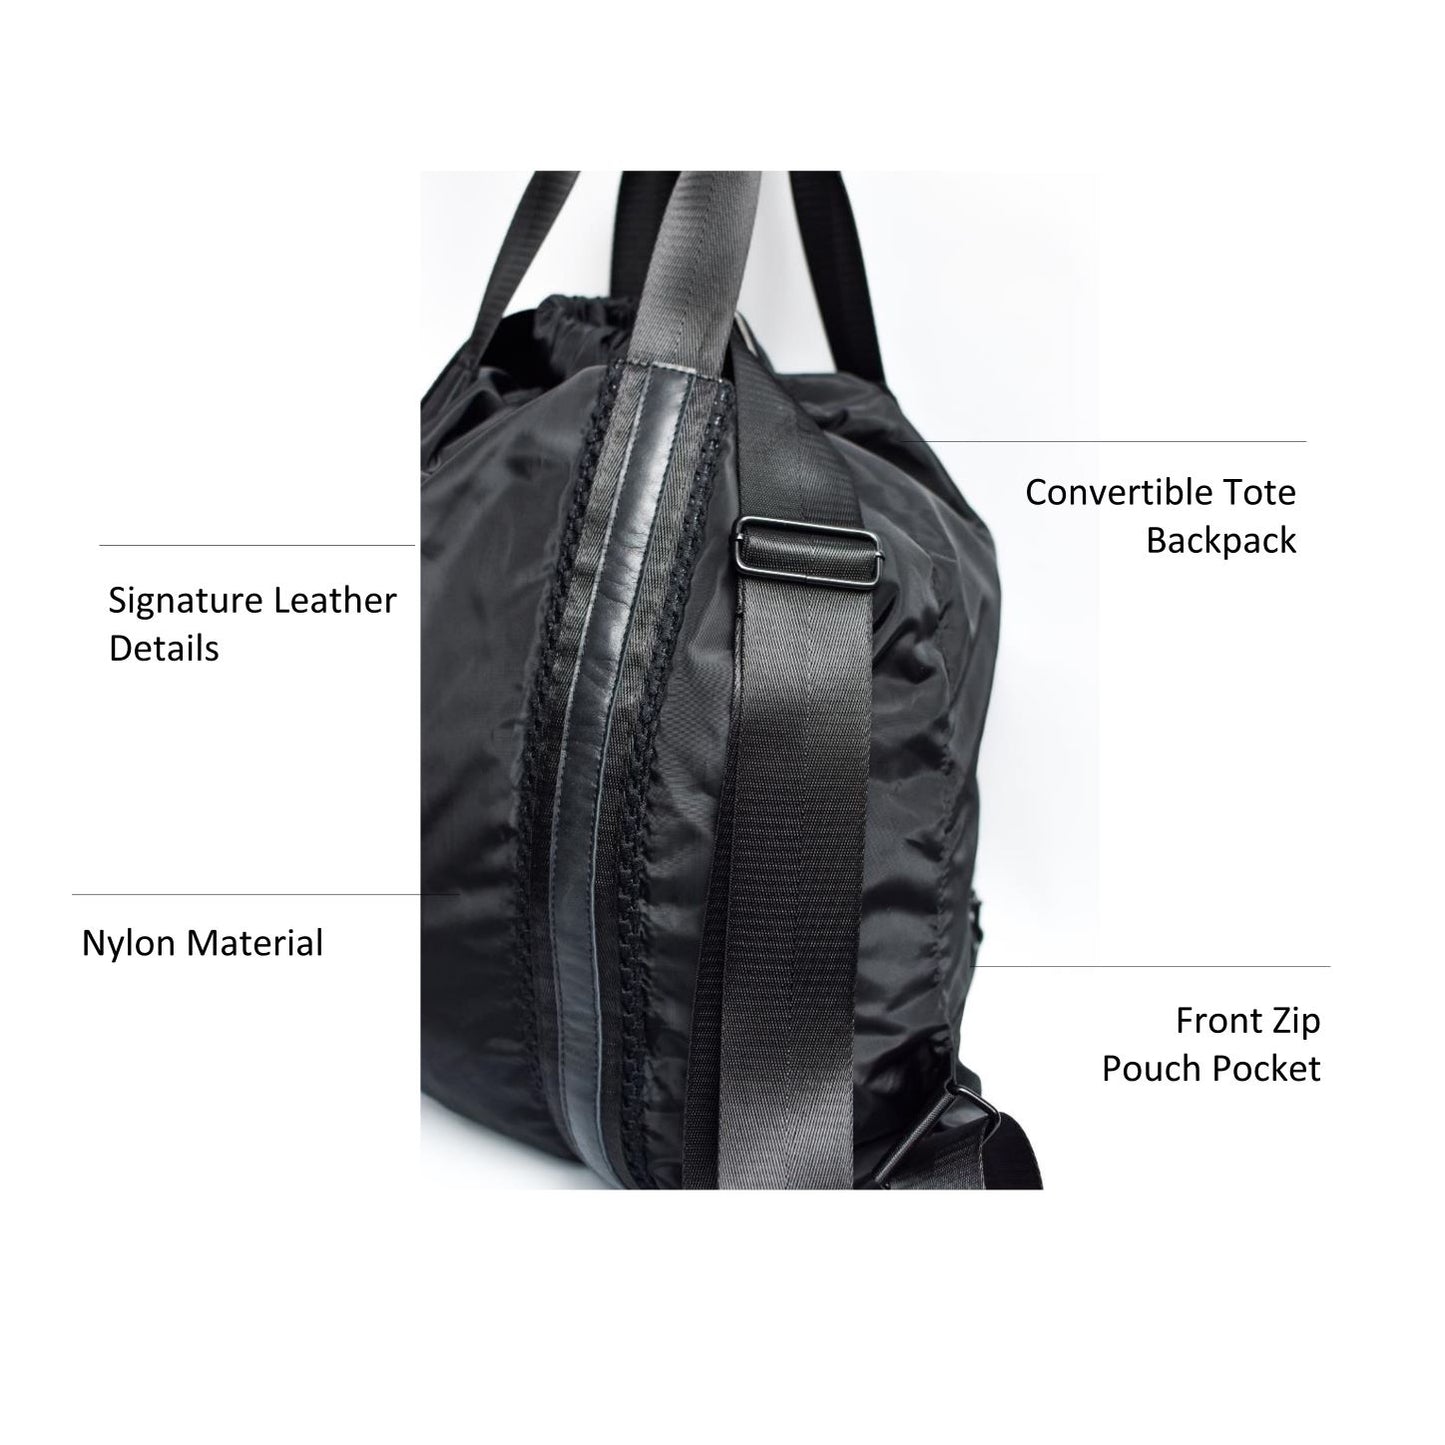 Black nylon convertible backpack tote with leather details.